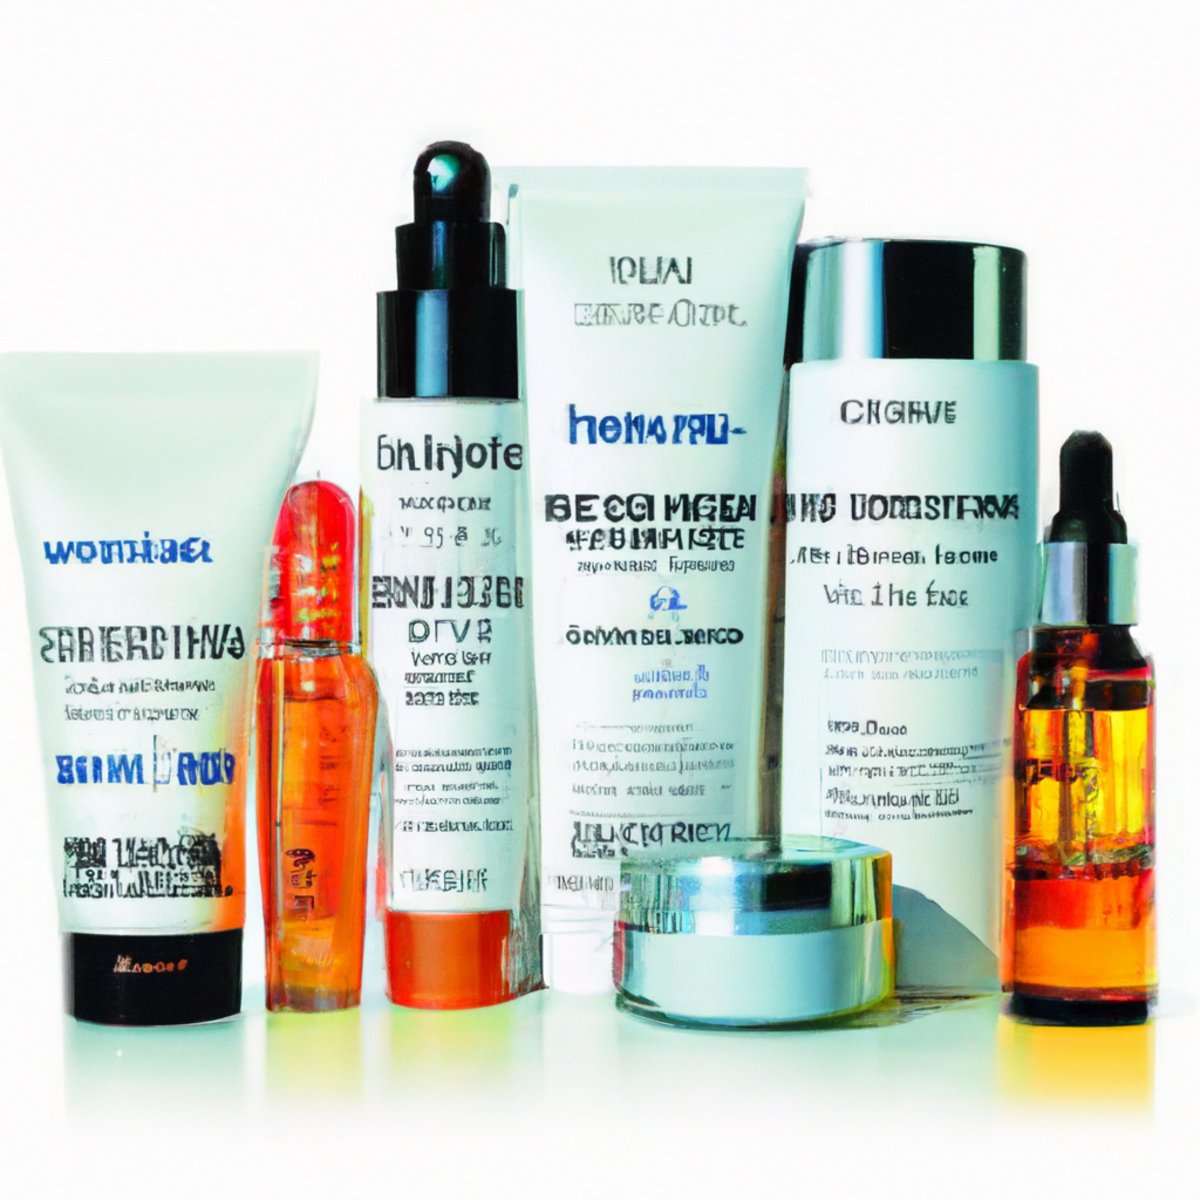 Various skincare products neatly arranged on a white background, highlighting their importance in melasma treatment.